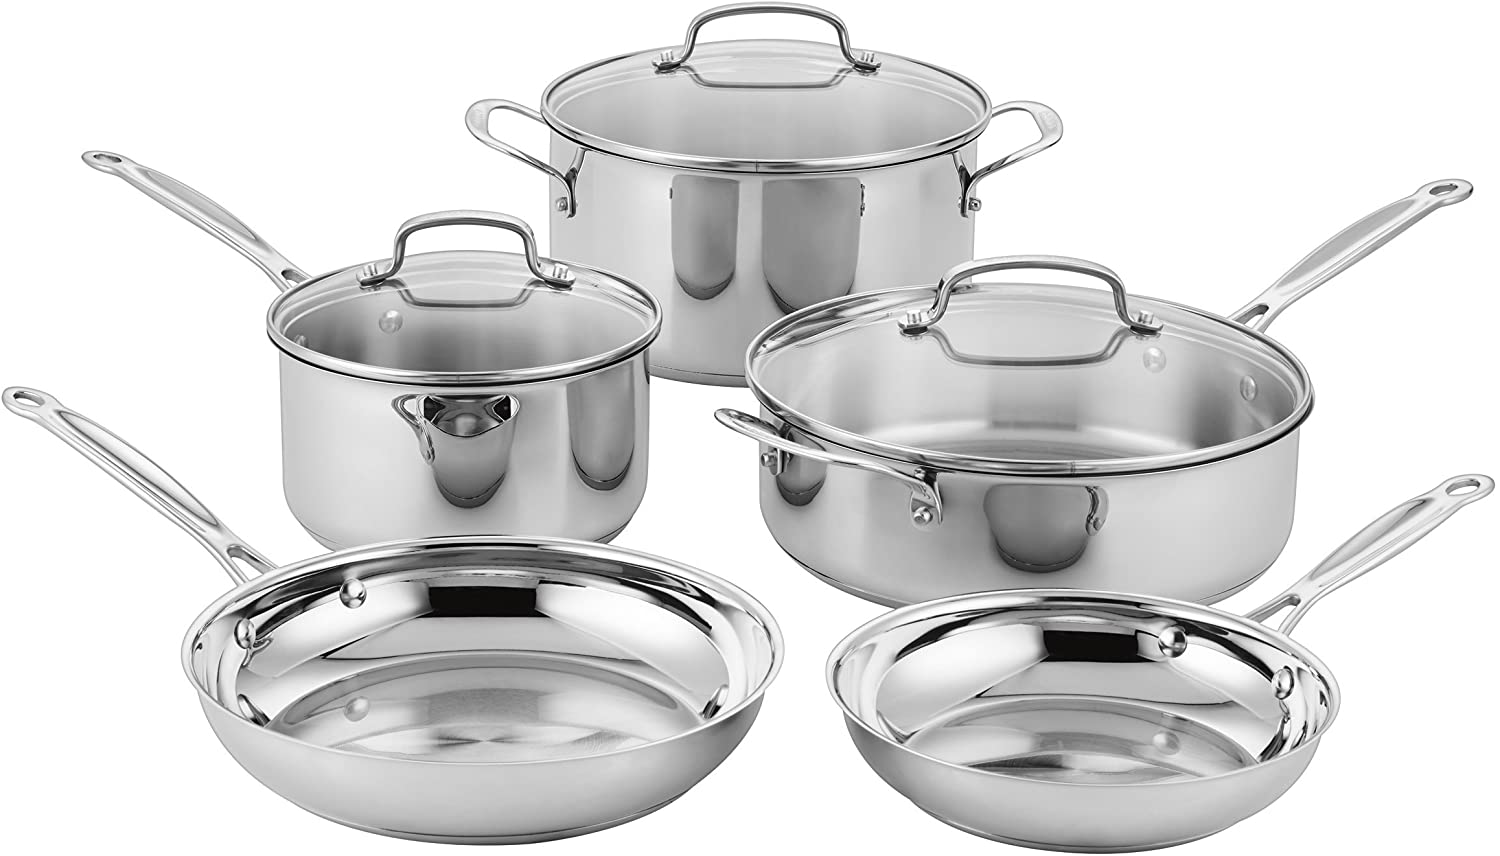  Cuisinart 8 pc classic stainless steel set for $98.99